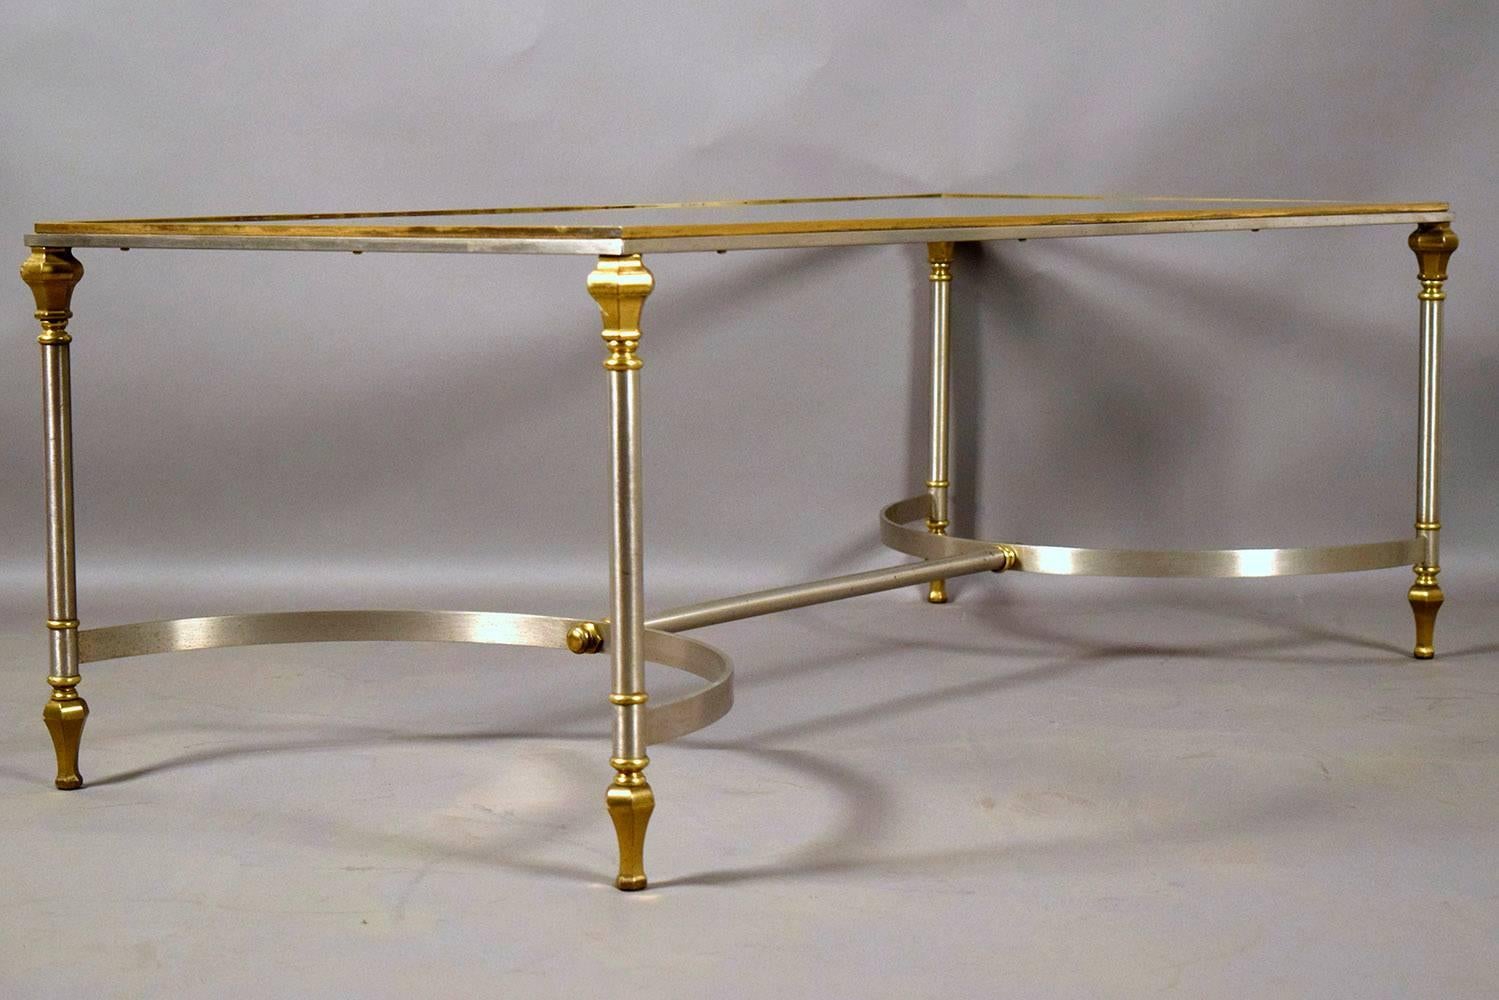 This Hollywood Regency-style Maison Jansen-style coffee table features an elegant brass and chrome frame. The legs of the coffee table feature vertical fluting and decorative capitals and feet. The legs are strengthened by half circle stretched